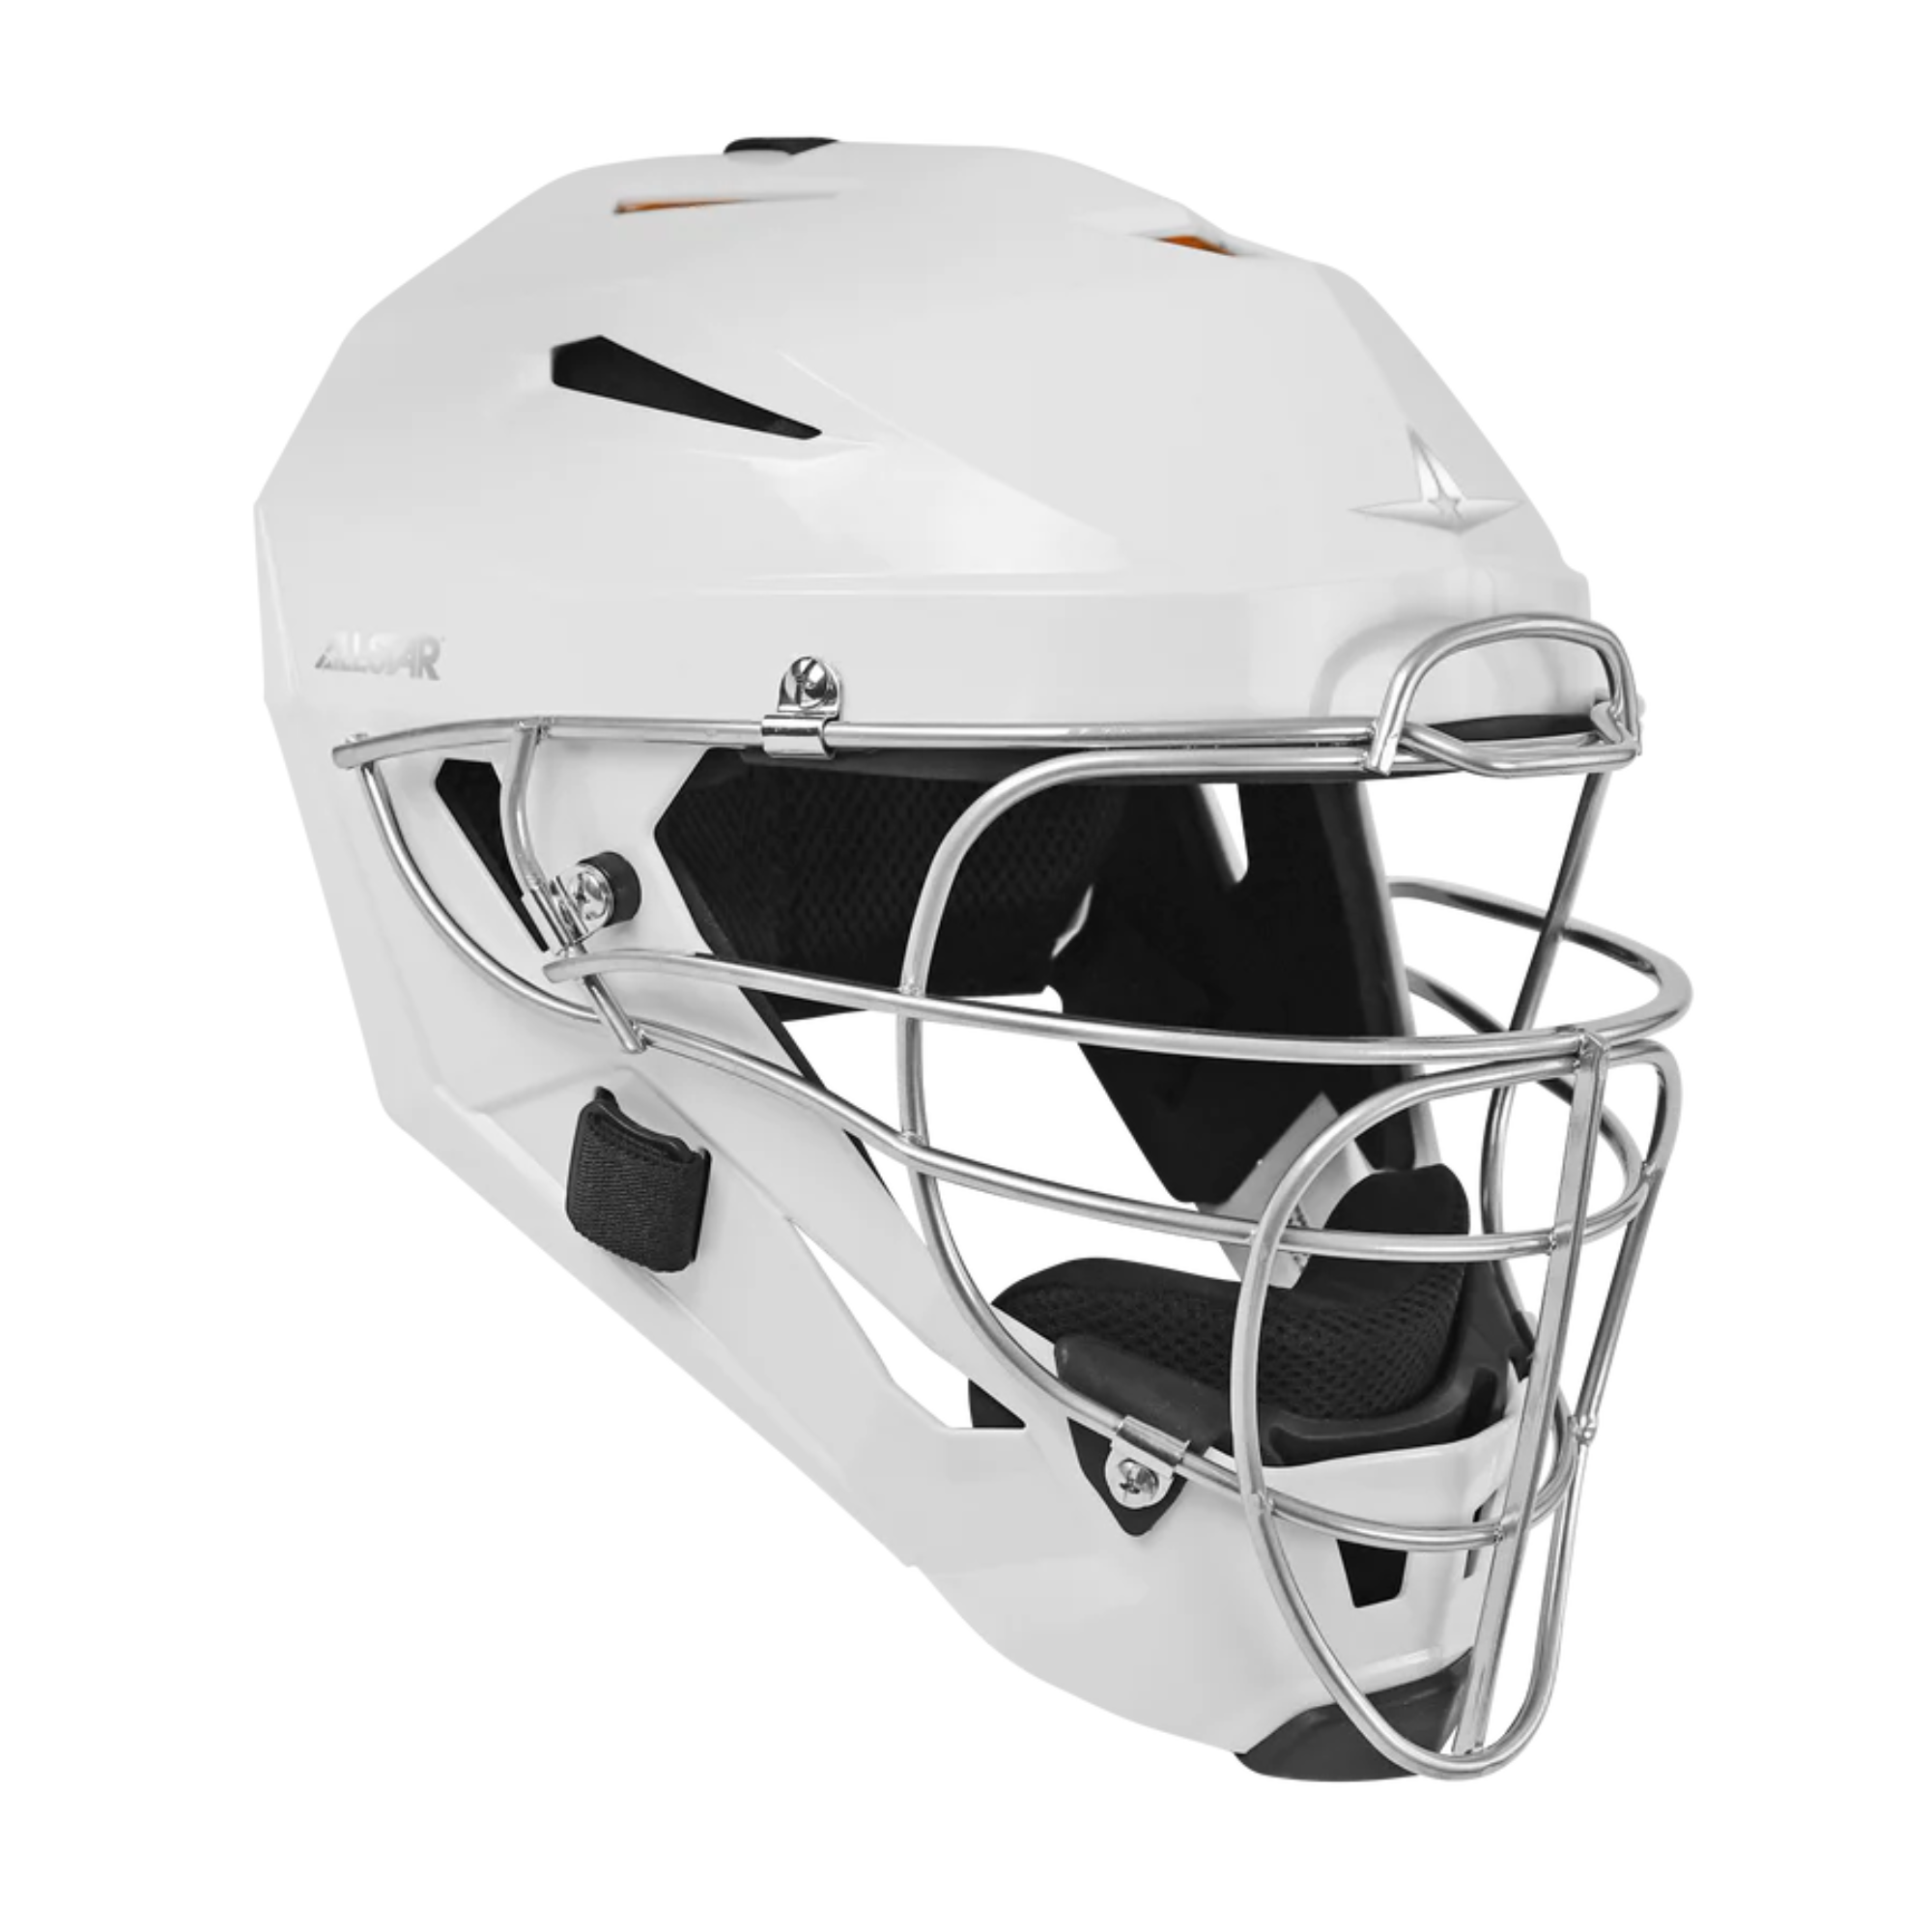 All-Star PHX Fastpitch Catching Kit / Paige Halstead Inspired White